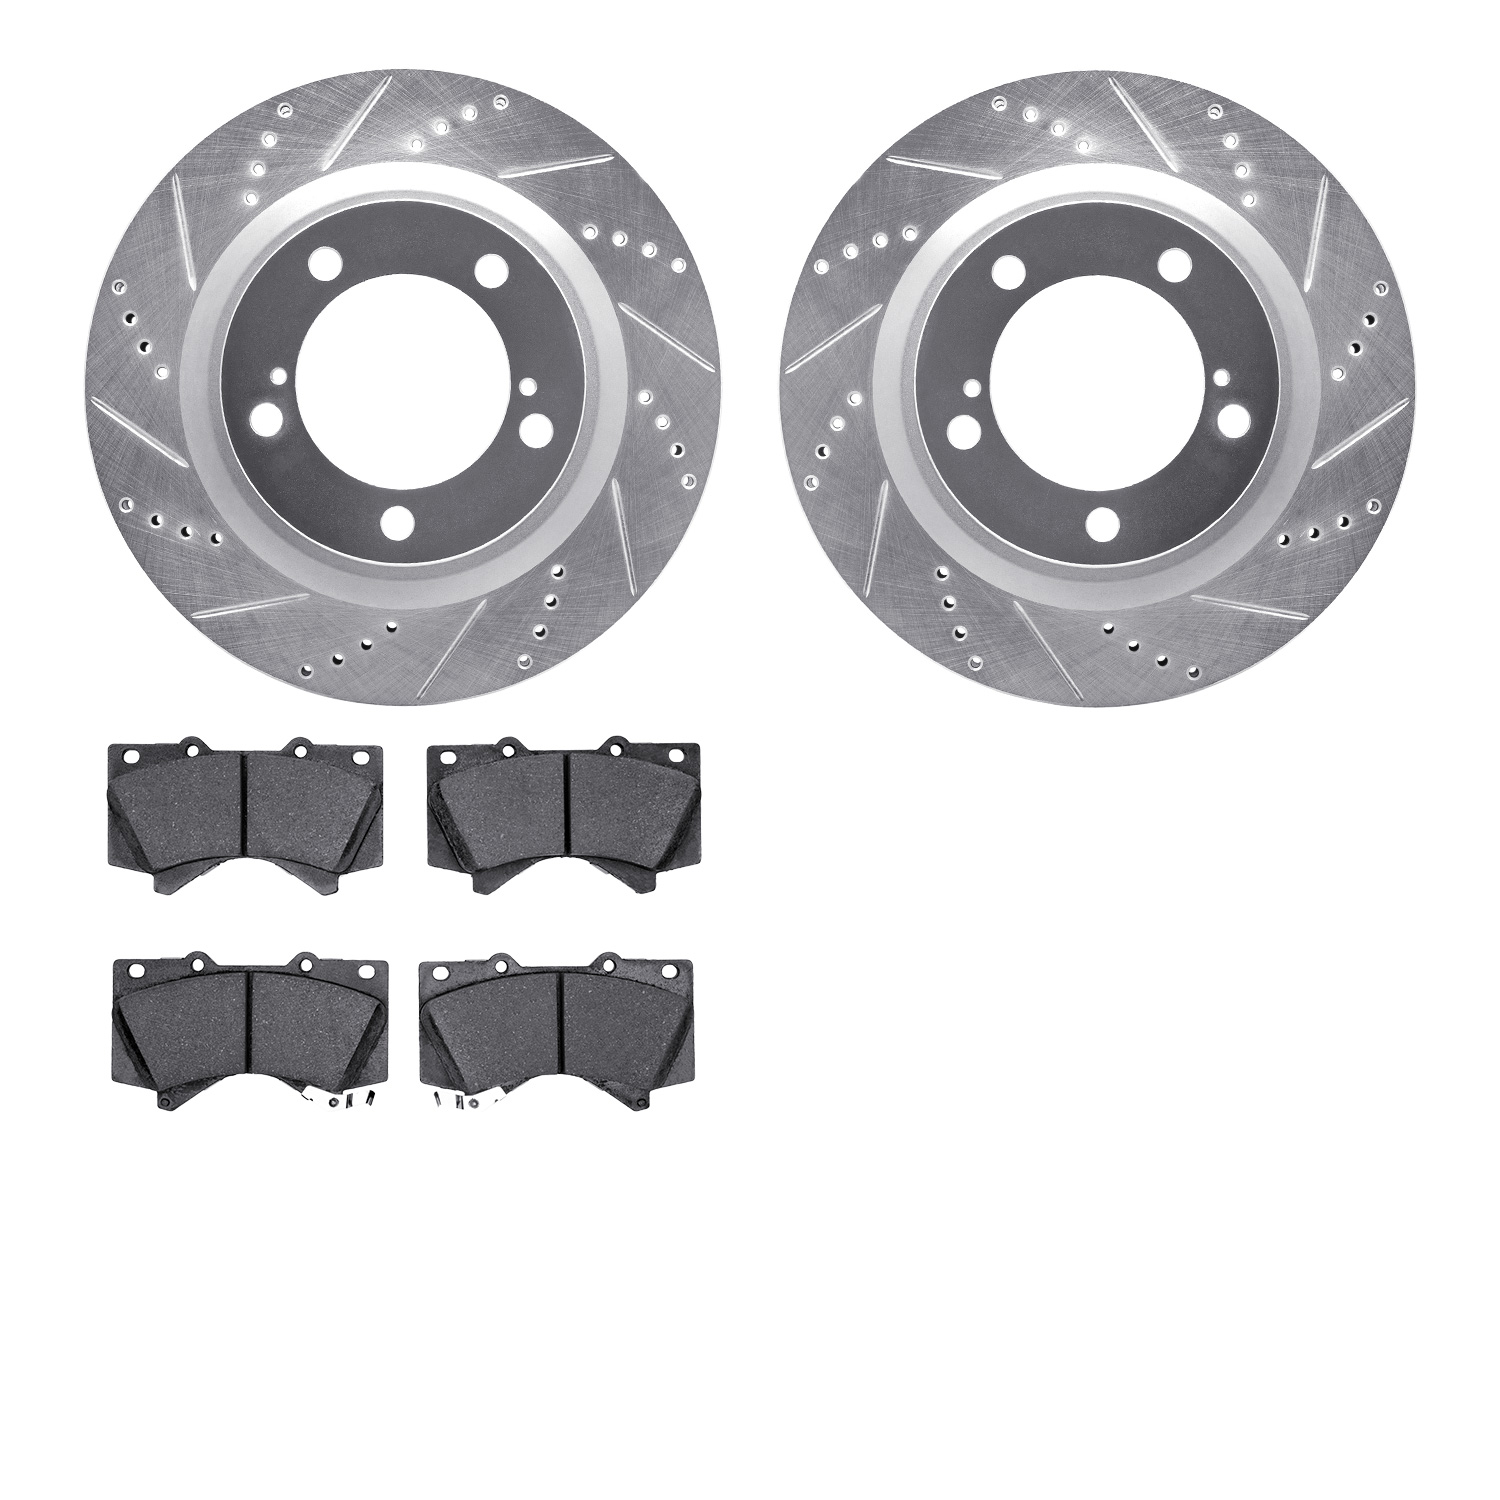 7302-76161 Drilled/Slotted Brake Rotor with 3000-Series Ceramic Brake Pads Kit [Silver], Fits Select Lexus/Toyota/Scion, Positio